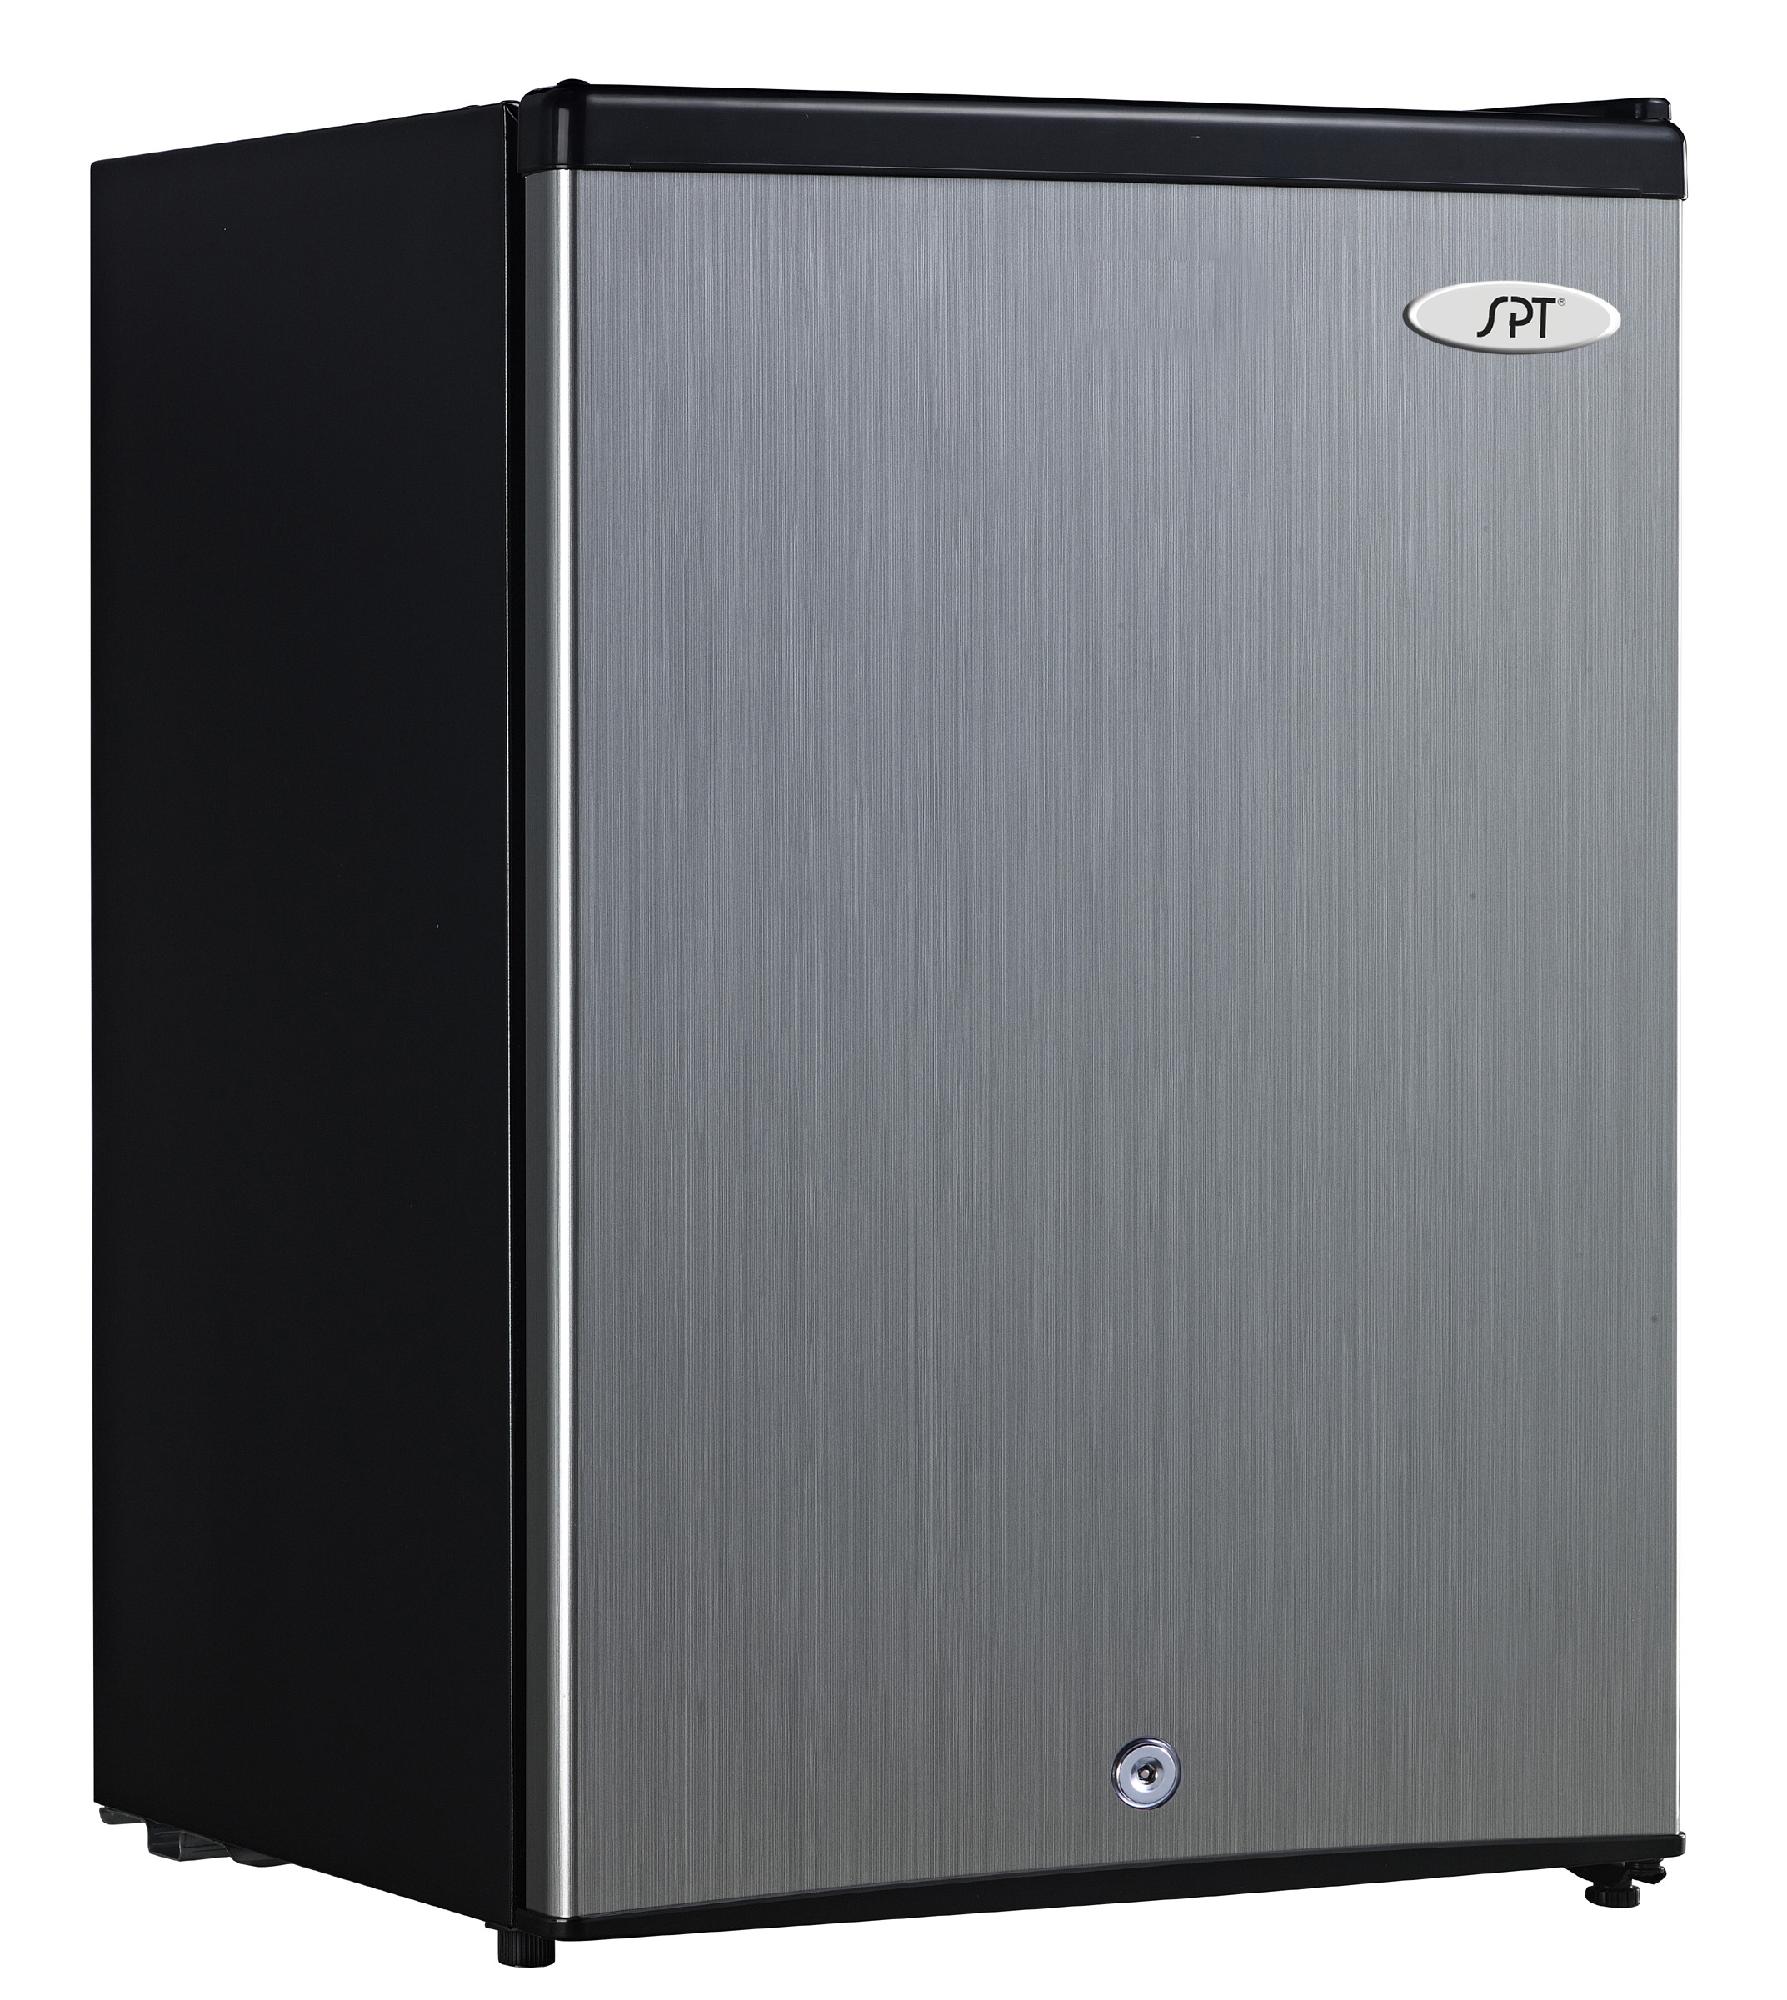 SPT UF-213SS 2.1 cu.ft. Upright Freezer in Stainless Steel - Energy Star